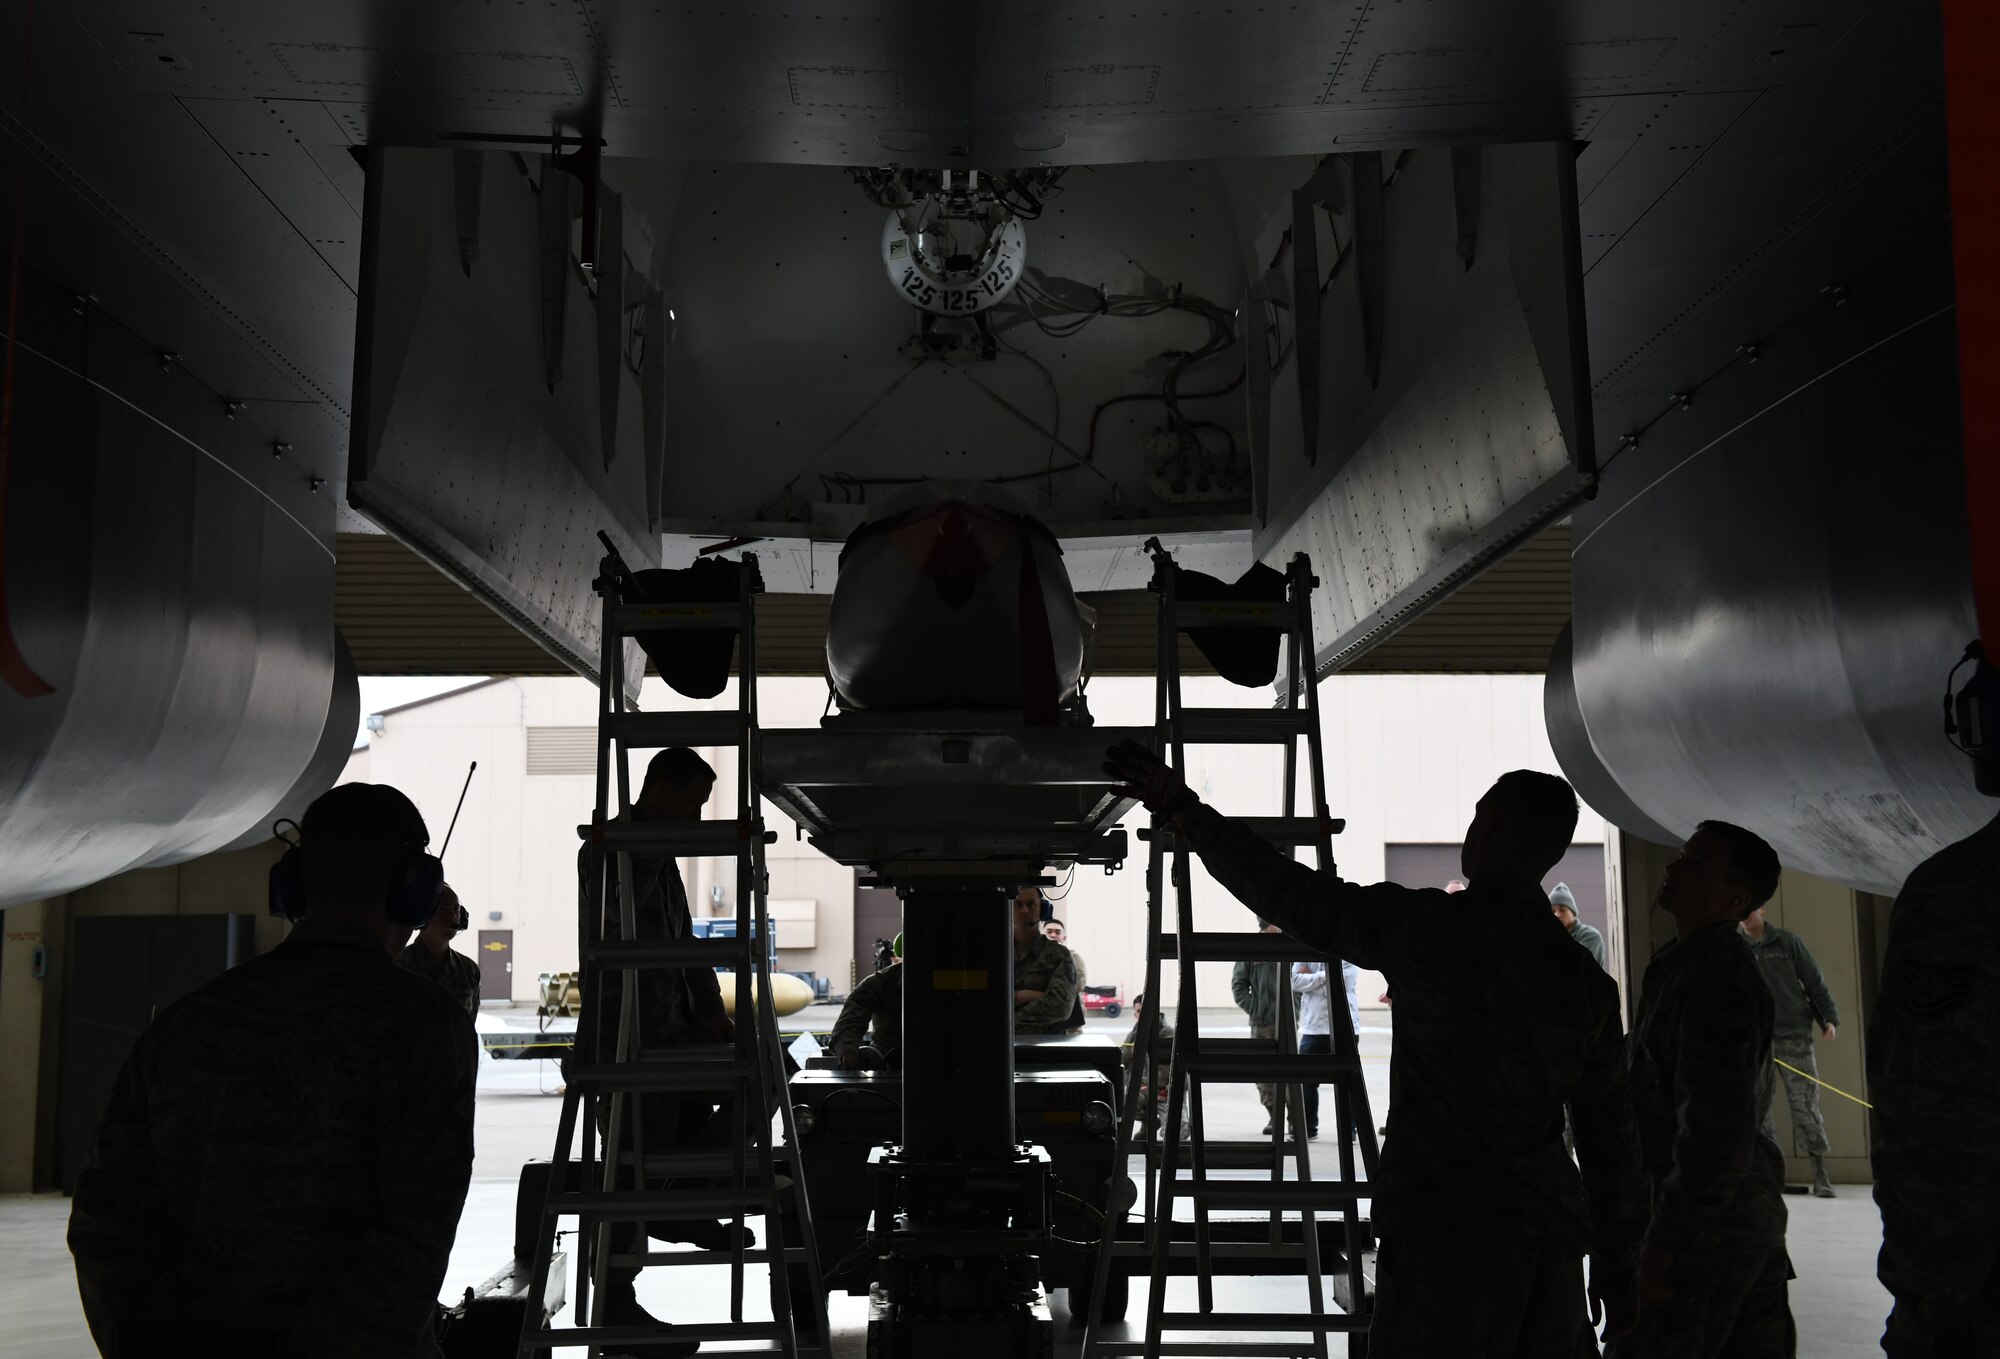 Load Crew Members assigned to the 34th Aircraft Maintenance Unit prepare to load an inert AGM-158 Joint Air-to-Surface Standoff Missile into a simulated B-1 Bomber at the annual weapons loading competition at Ellsworth Air Force Base, S.D., Jan. 7, 2019. The JASSM weighs 2,250 pounds and has to be lifted approximately 17 feet in the air to be inserted into the bomb bay of the simulated B-1 bomber. (U.S. Air Force photo by Airman 1st Class Christina Bennett)